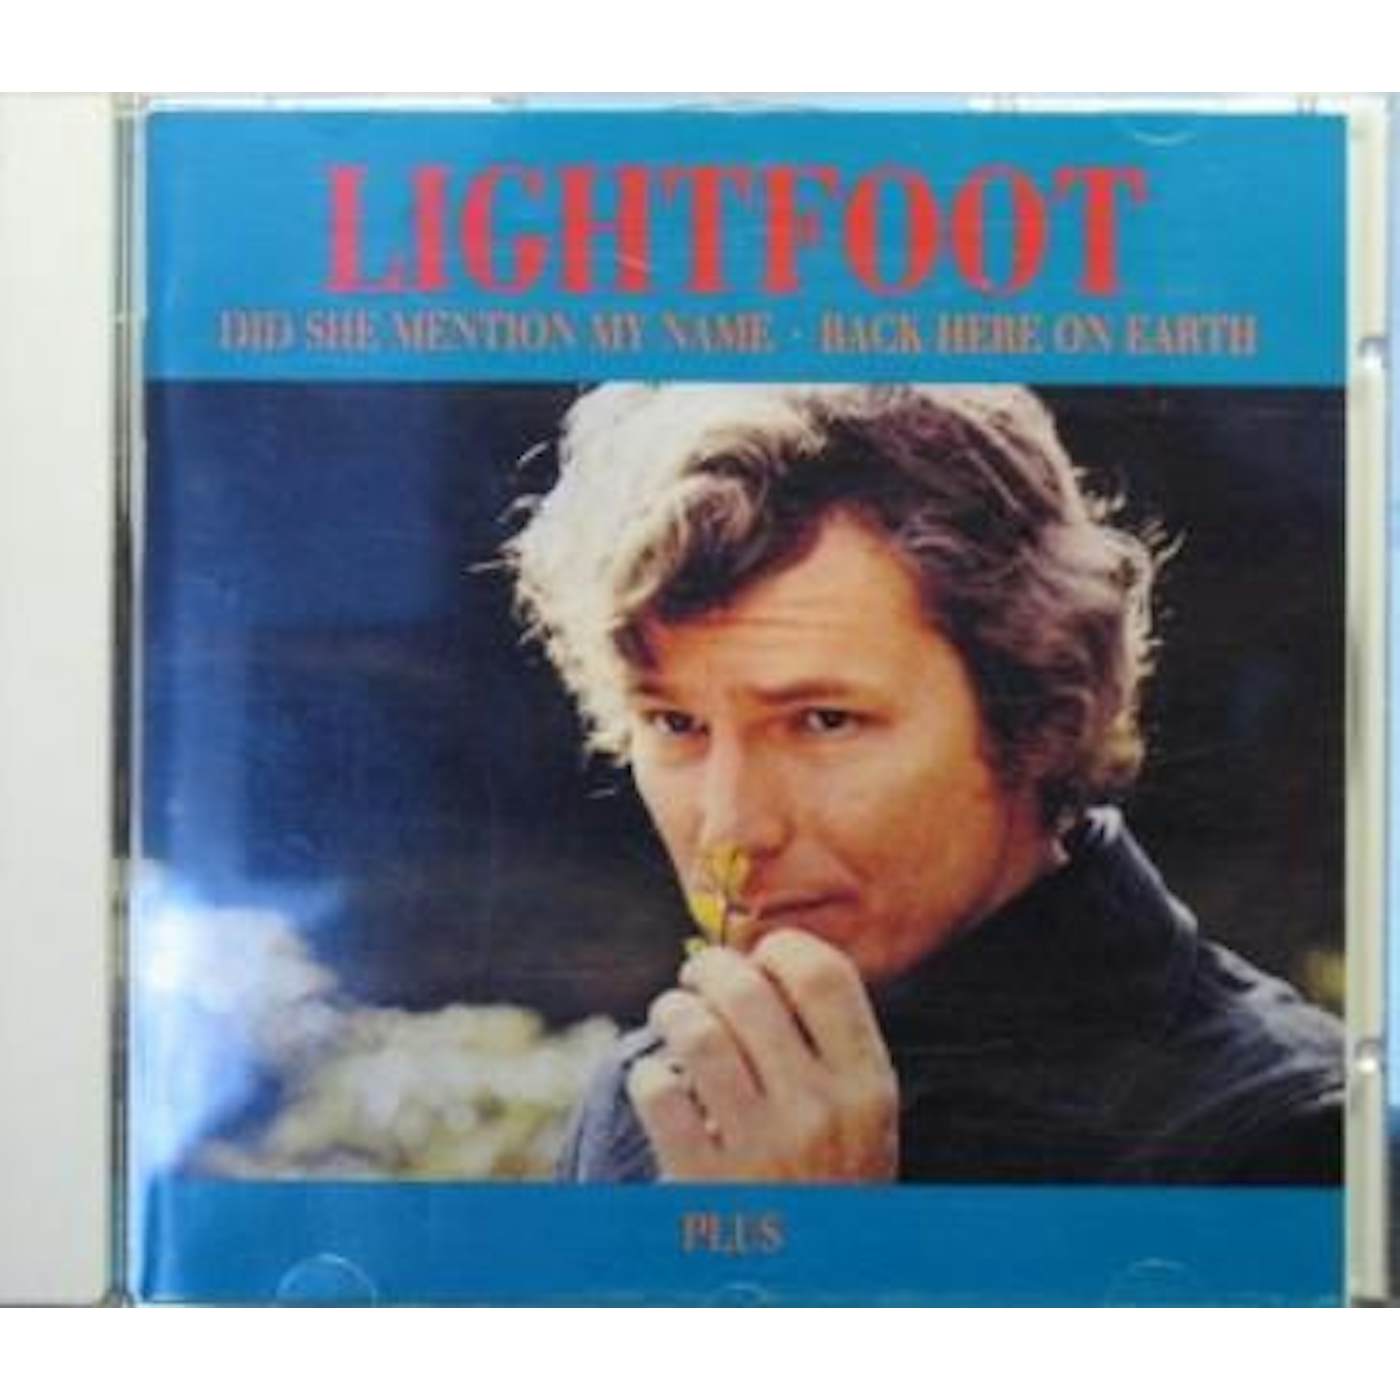 Gordon Lightfoot DID SHE MENTION MY NAME/BACK HERE ON EARTH CD